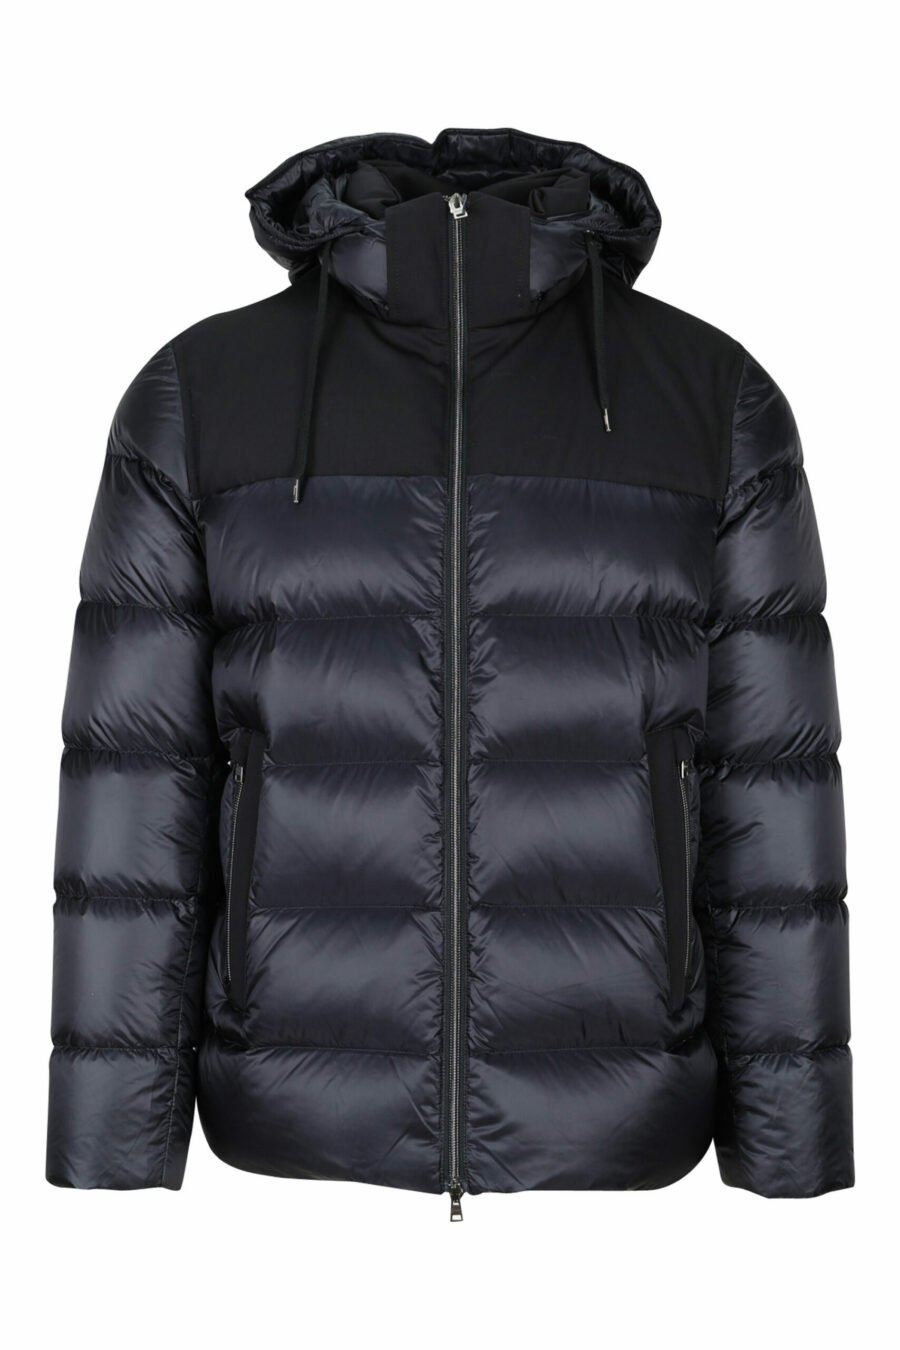 Black mix hooded jacket with hood - 8055721704395 scaled